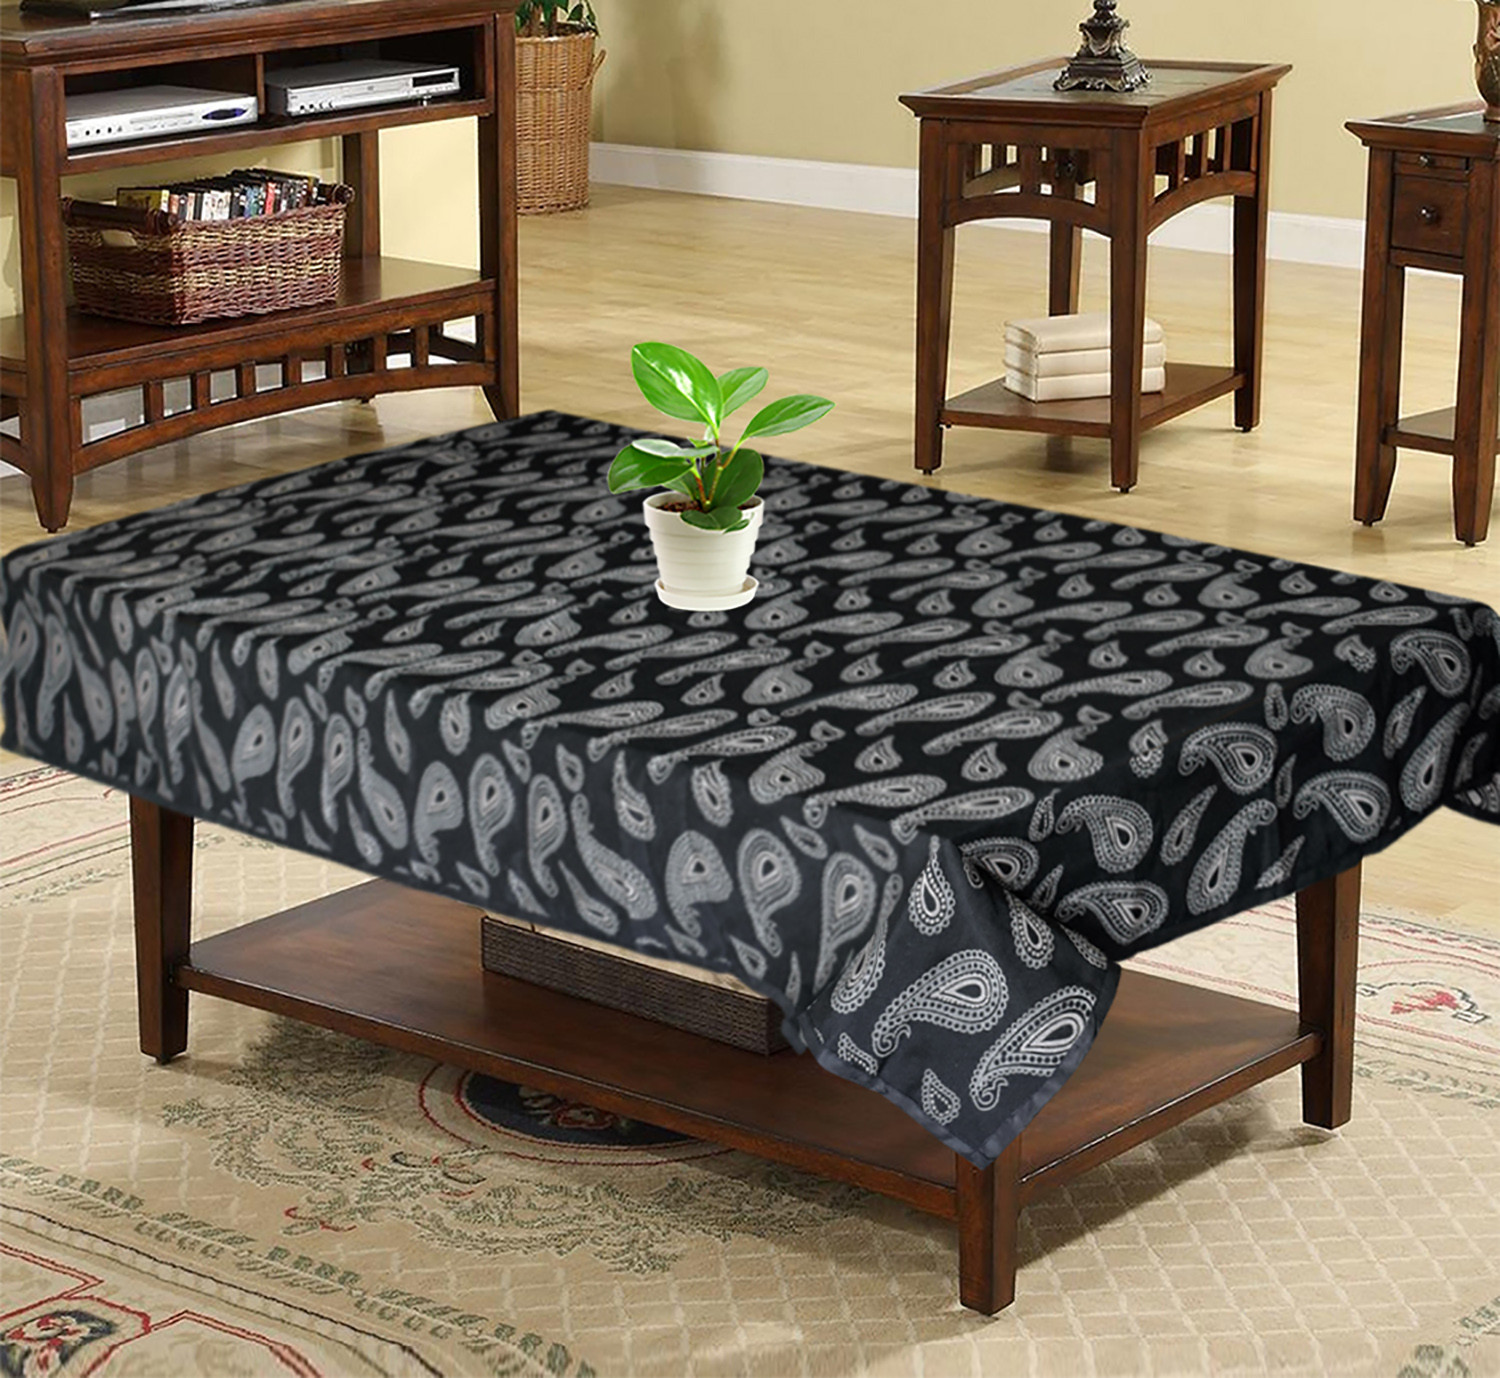 Kuber Industries Cotton Carry Print 4 Seater Center Table Cover/Table Cloth For Home Decorative 60 In. x 40 In. (Black) 54KM4376